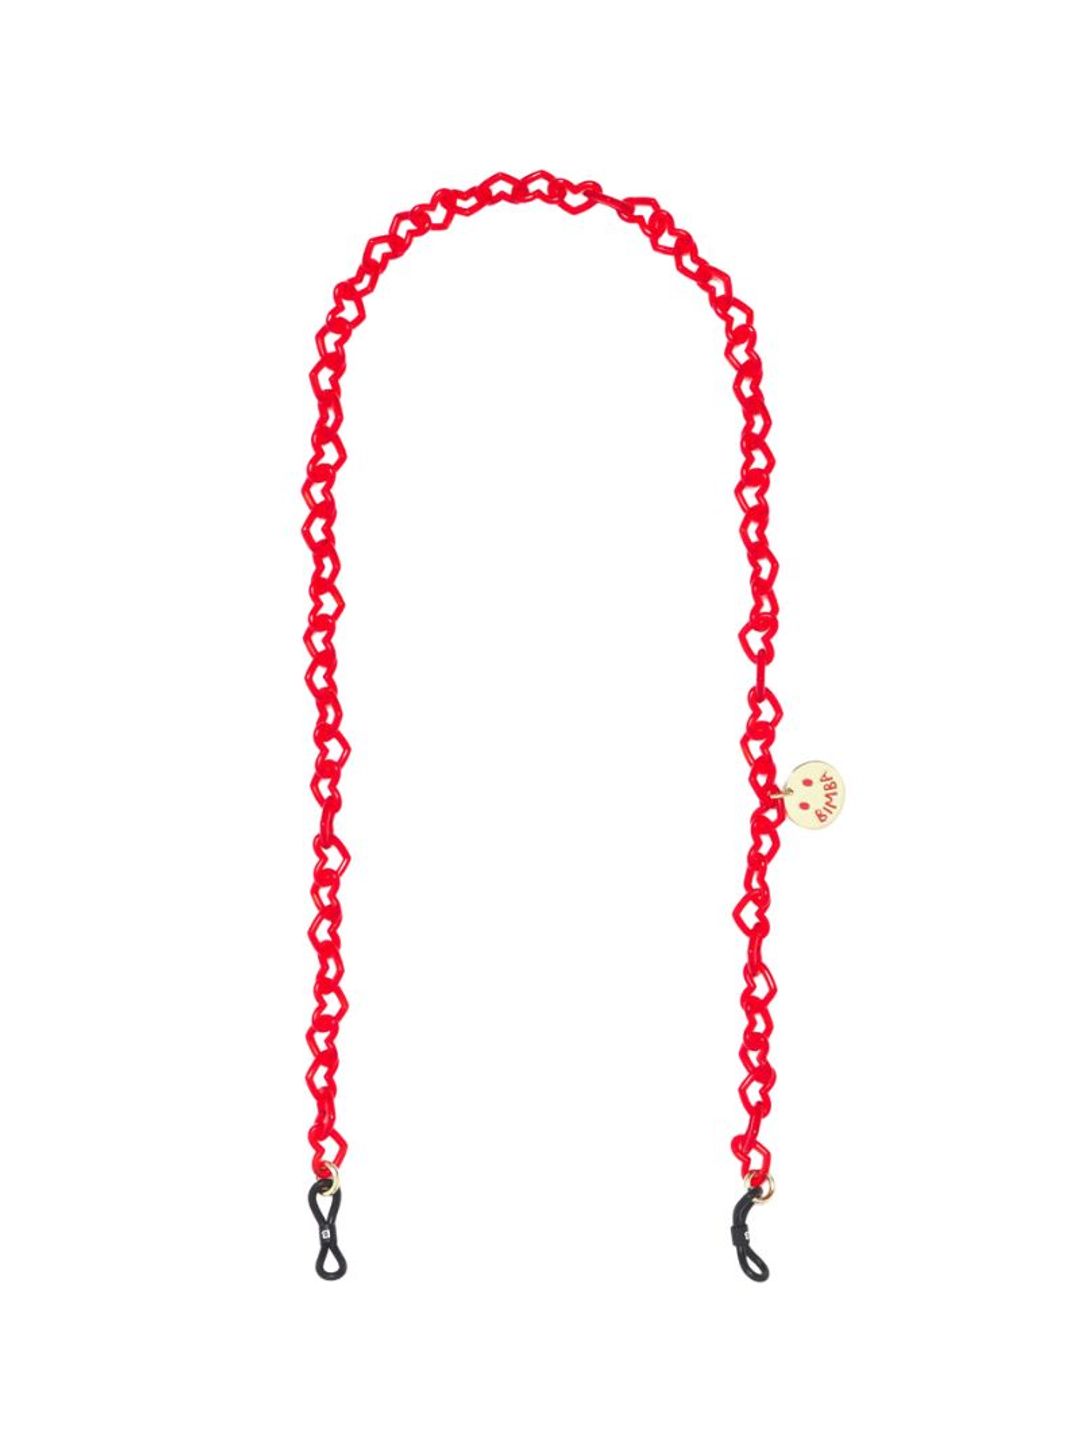 Red hearts glasses chain